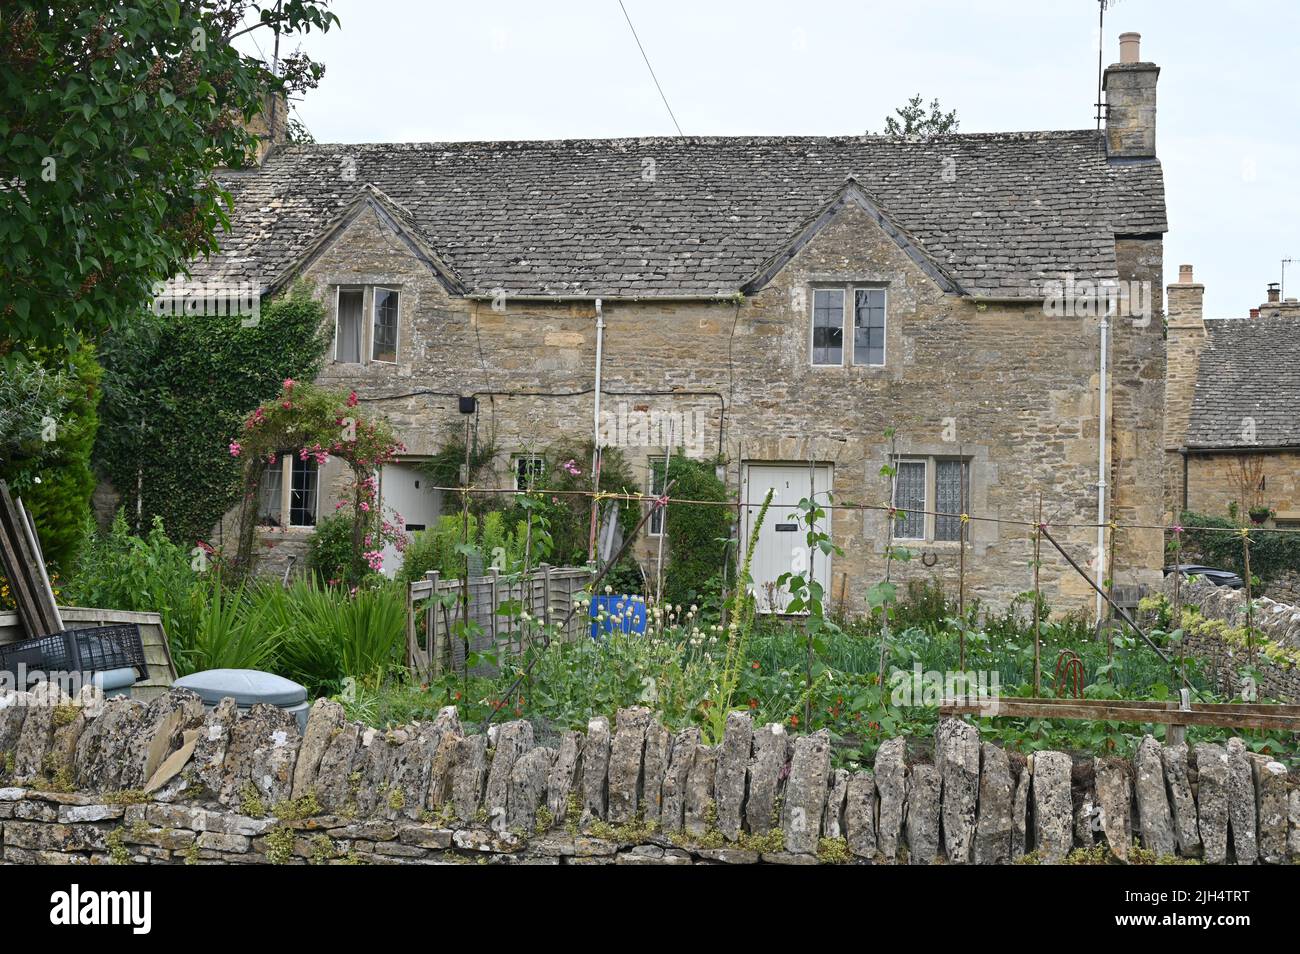 A cottage in the Gloucestershire village of Upper Slaughter shows off the front gaden which contains a variety of plants including sweet peas in flowe Stock Photo